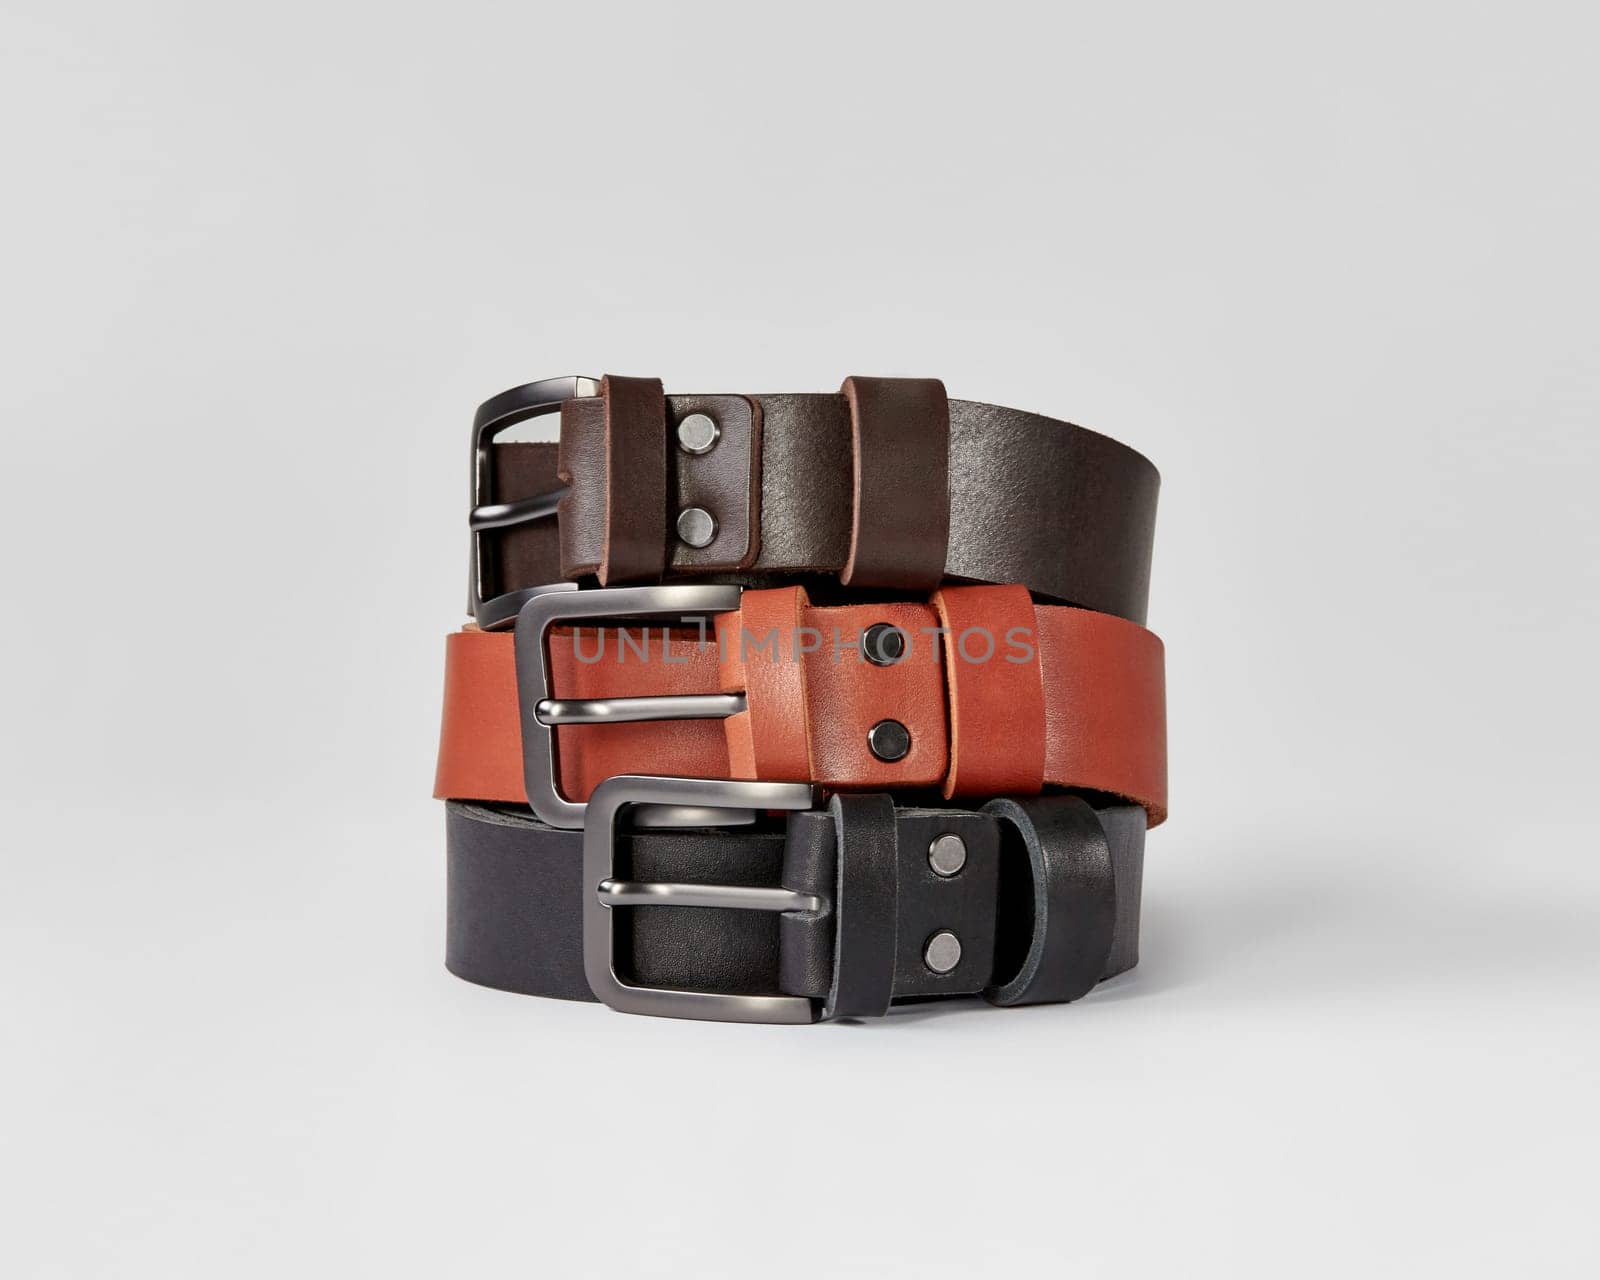 Three folded leather belts of different colors with DAD embossing by nazarovsergey